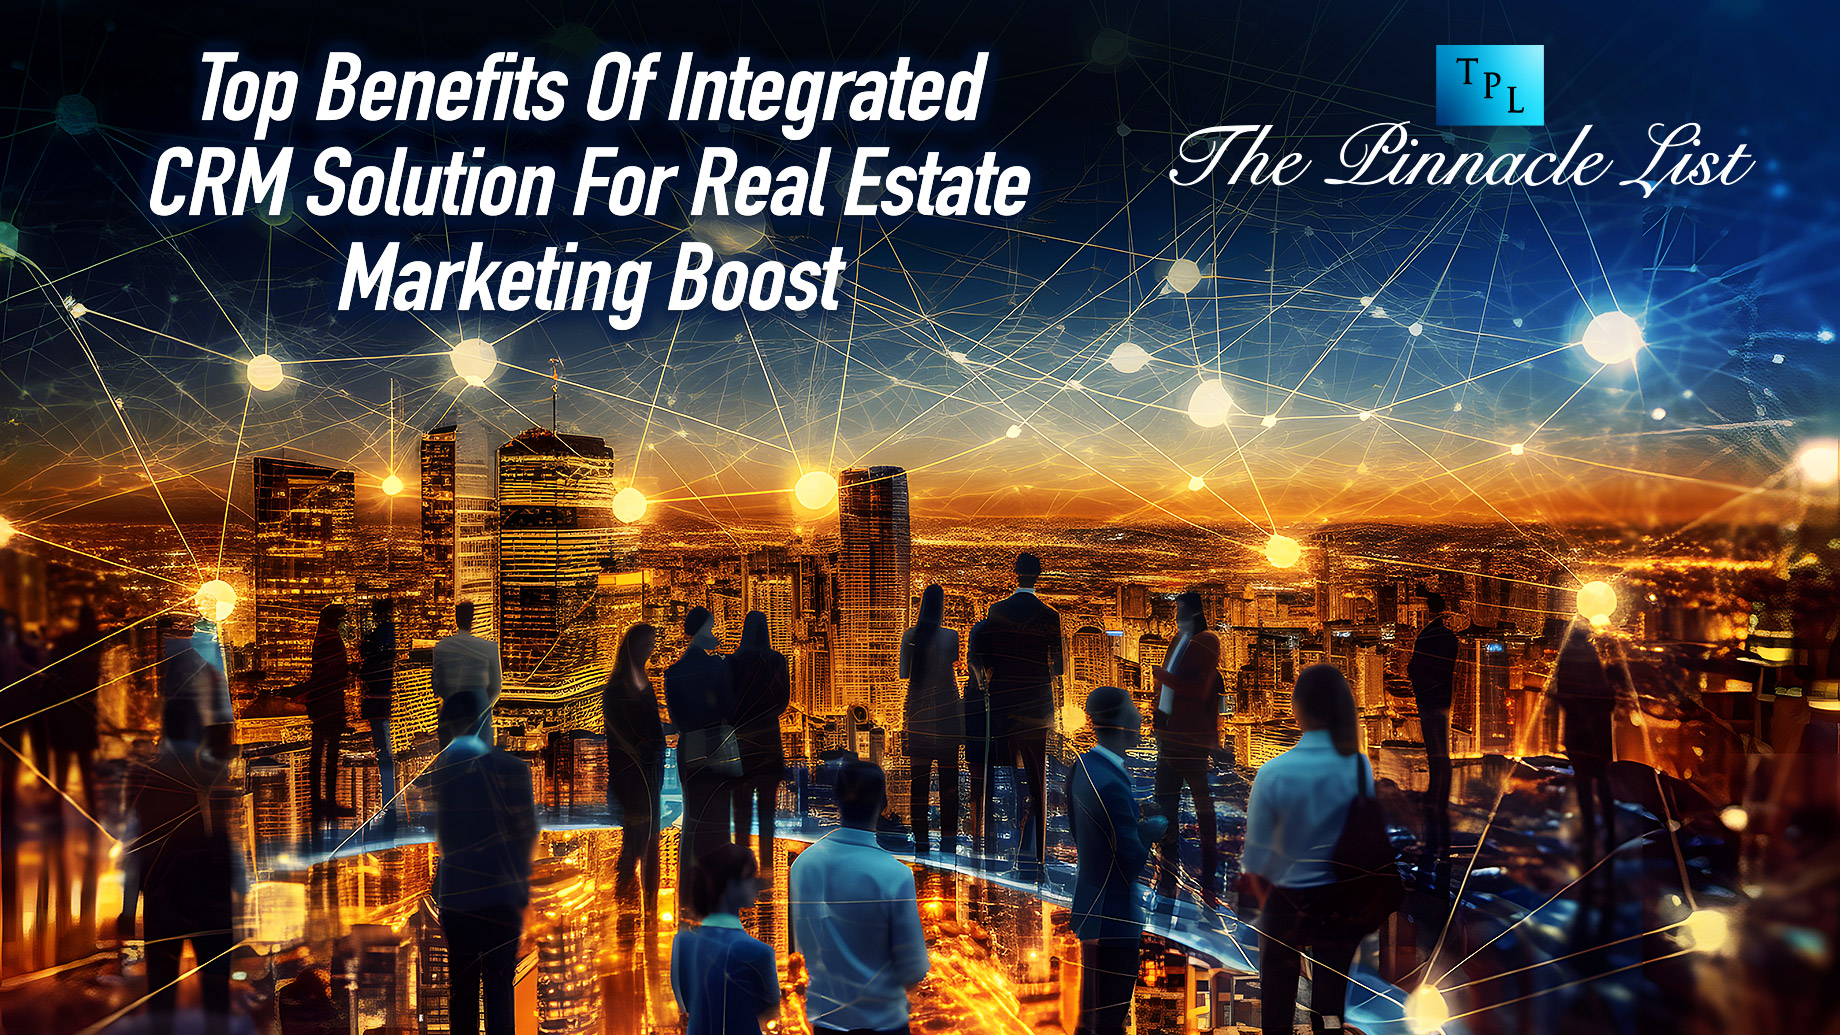 Top Benefits Of Integrated CRM Solution For Real Estate Marketing Boost